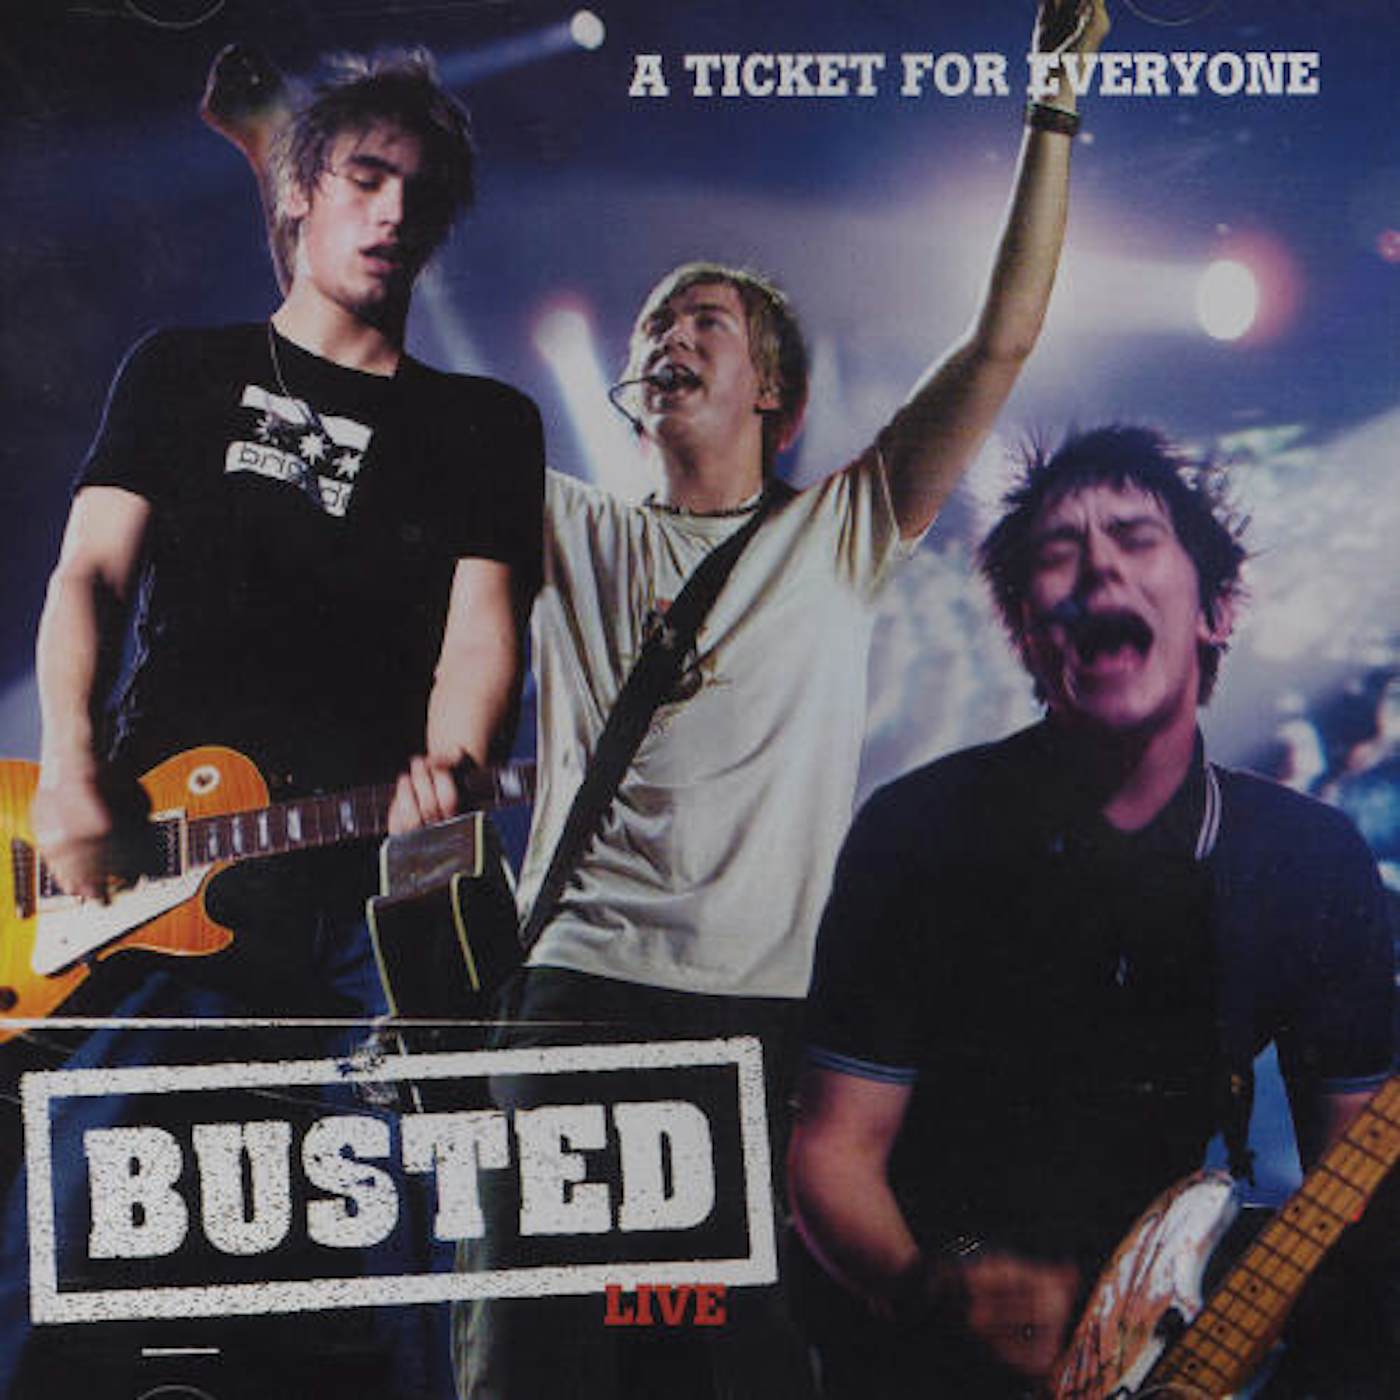 Busted LIVE-A TICKET FOR EVERYONE CD